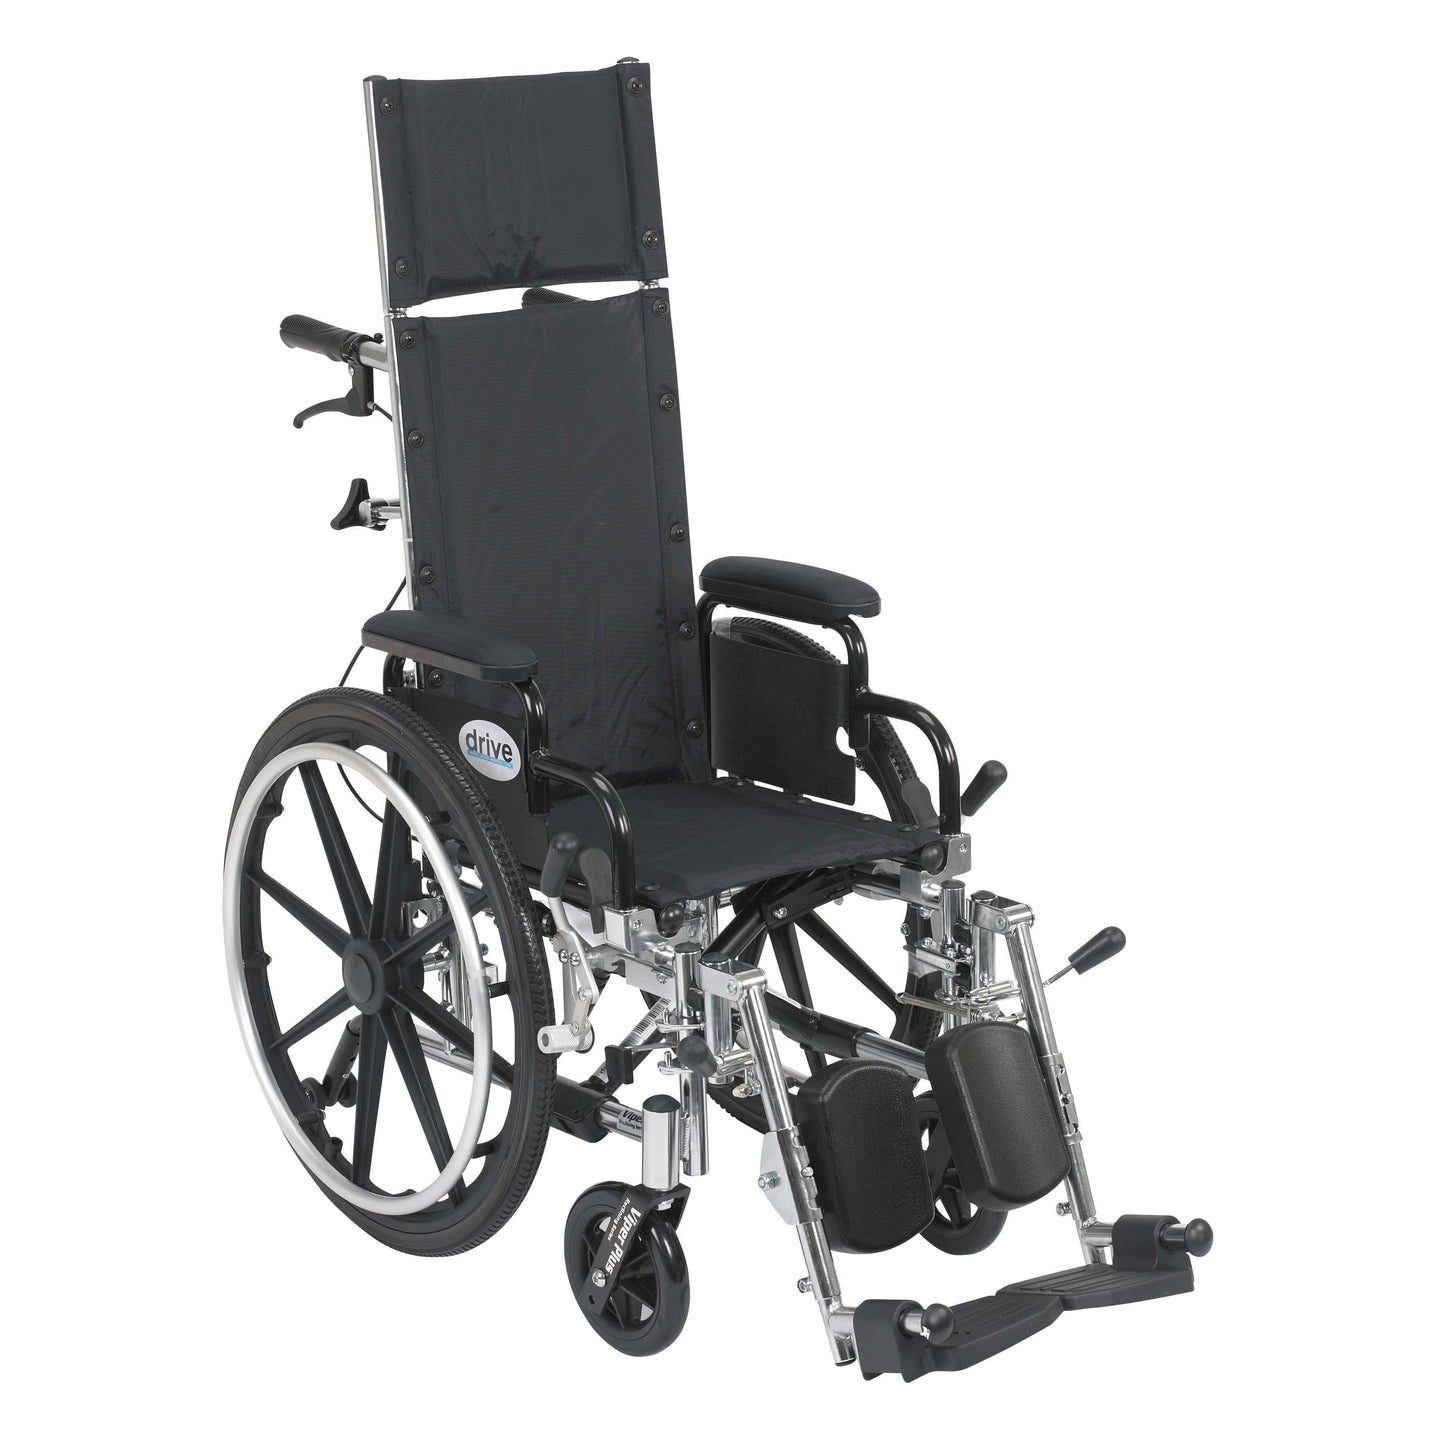 Drive pl412rbdda Viper Plus Light Weight Reclining Wheelchair with Elevating Leg Rests and Flip Back Detachable Arms, 12" Seat